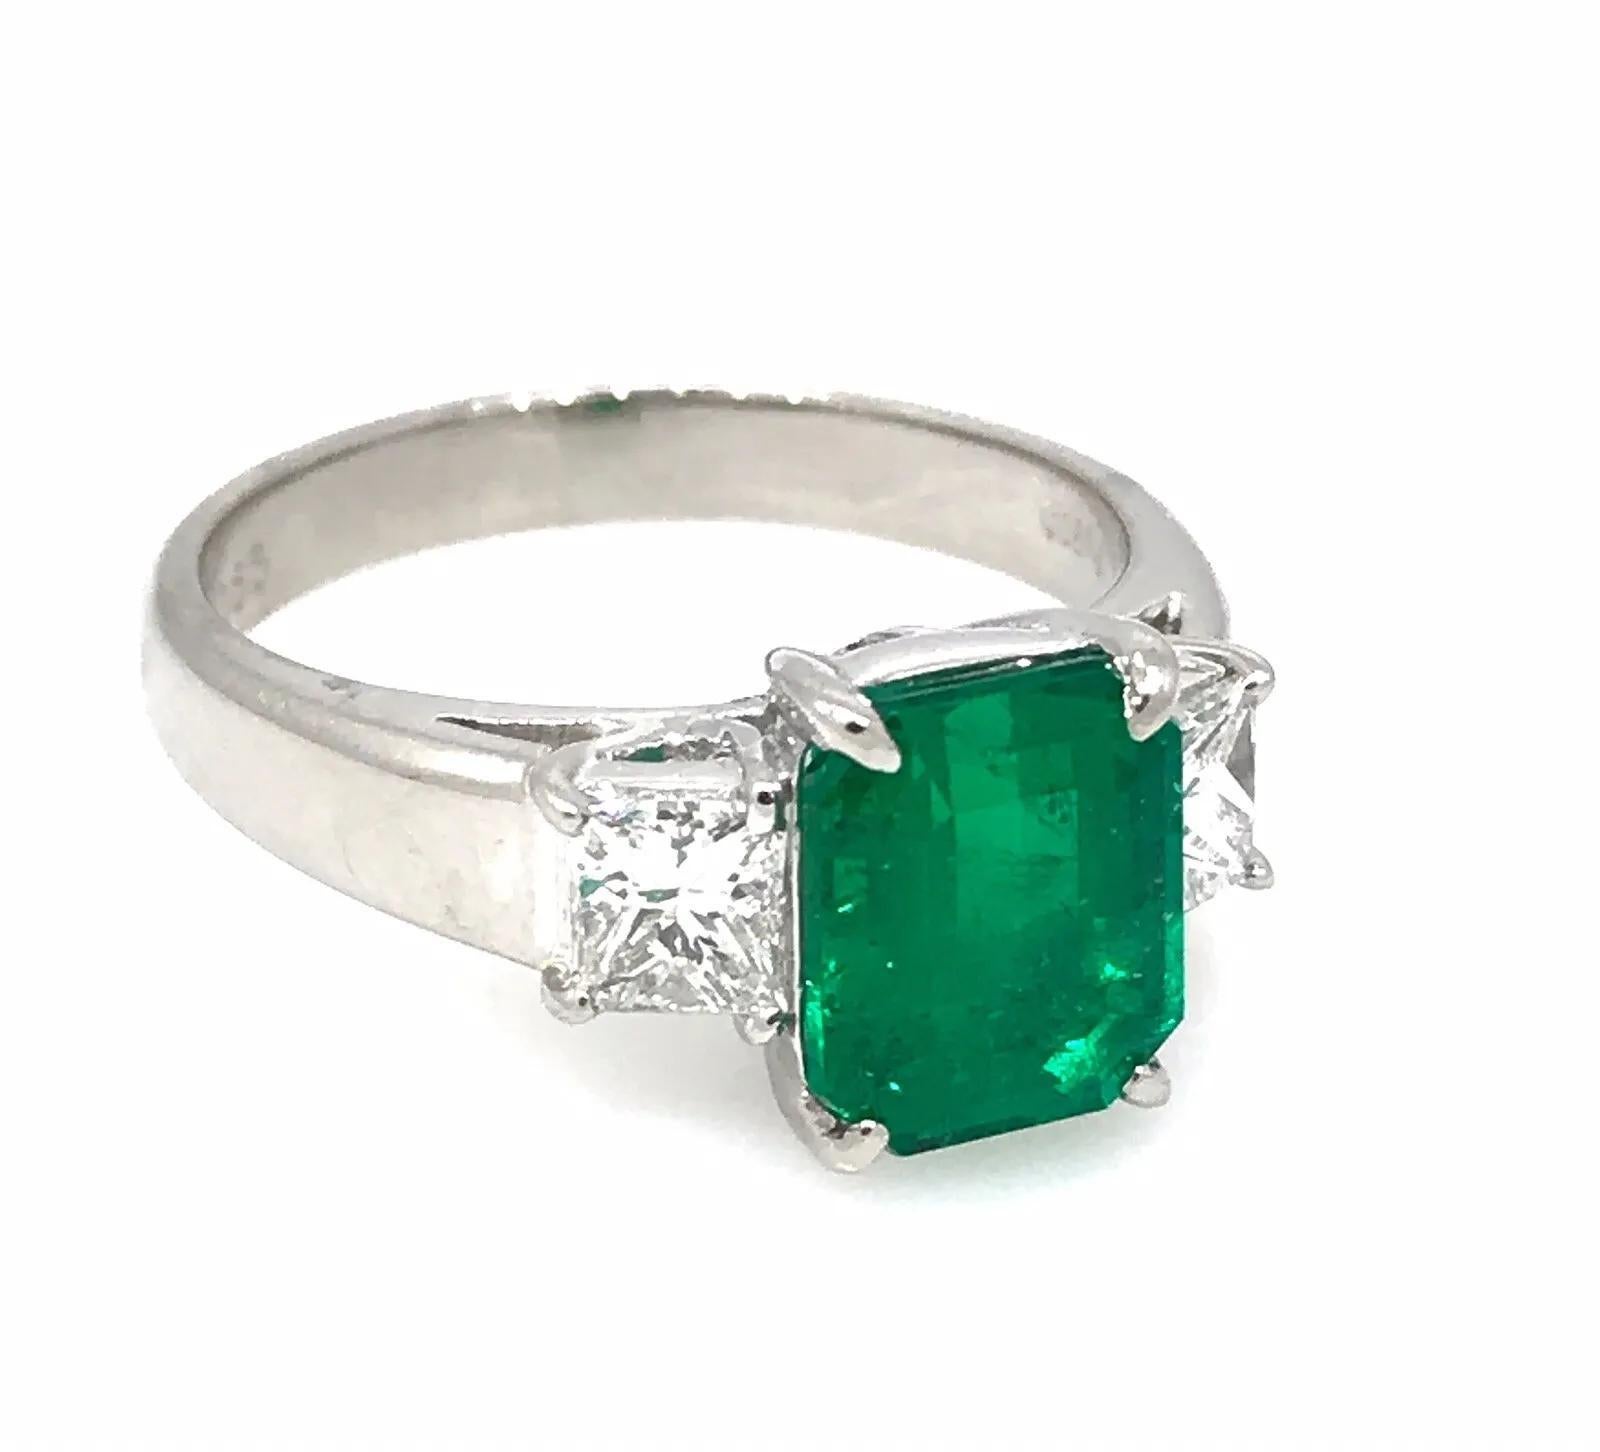 GIA Certified 2.09 carat Emerald Ring with Side Diamonds in Platinum

Emerald and Diamond Ring features a bright lively Green Rectangular-cut Emerald in the center with 2 Princess-cut Diamonds set in Platinum.

The emerald is of Colombian origin and